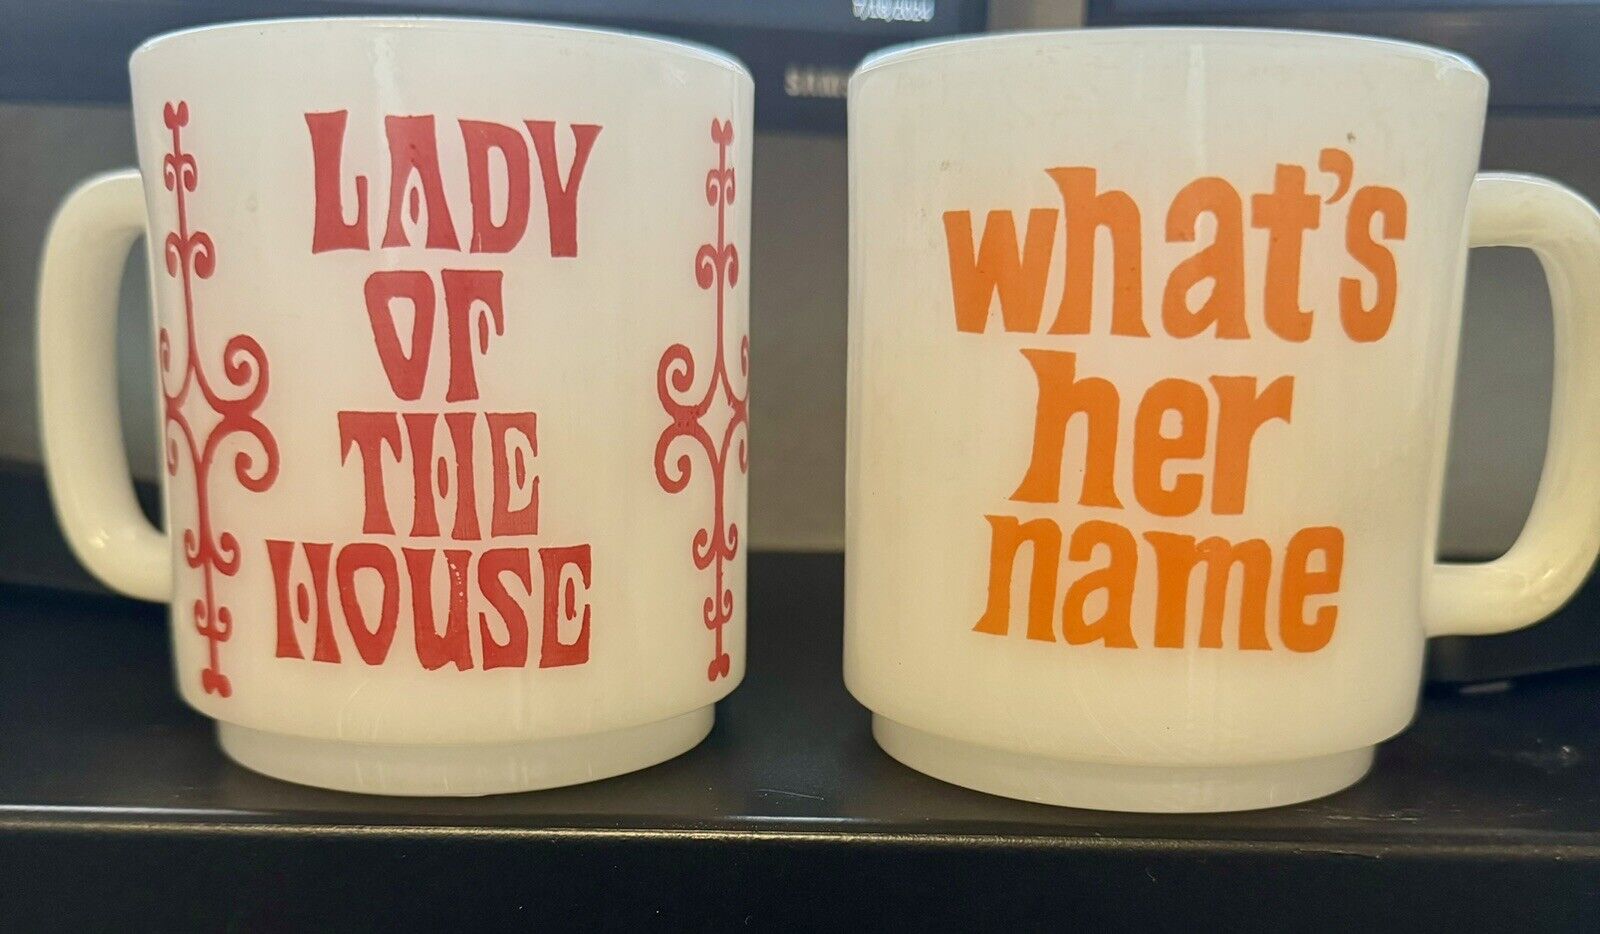 2 Vintage 1970’s Retro Milk Glass Mugs “Lady Of The House” & “What’s Her Name?”